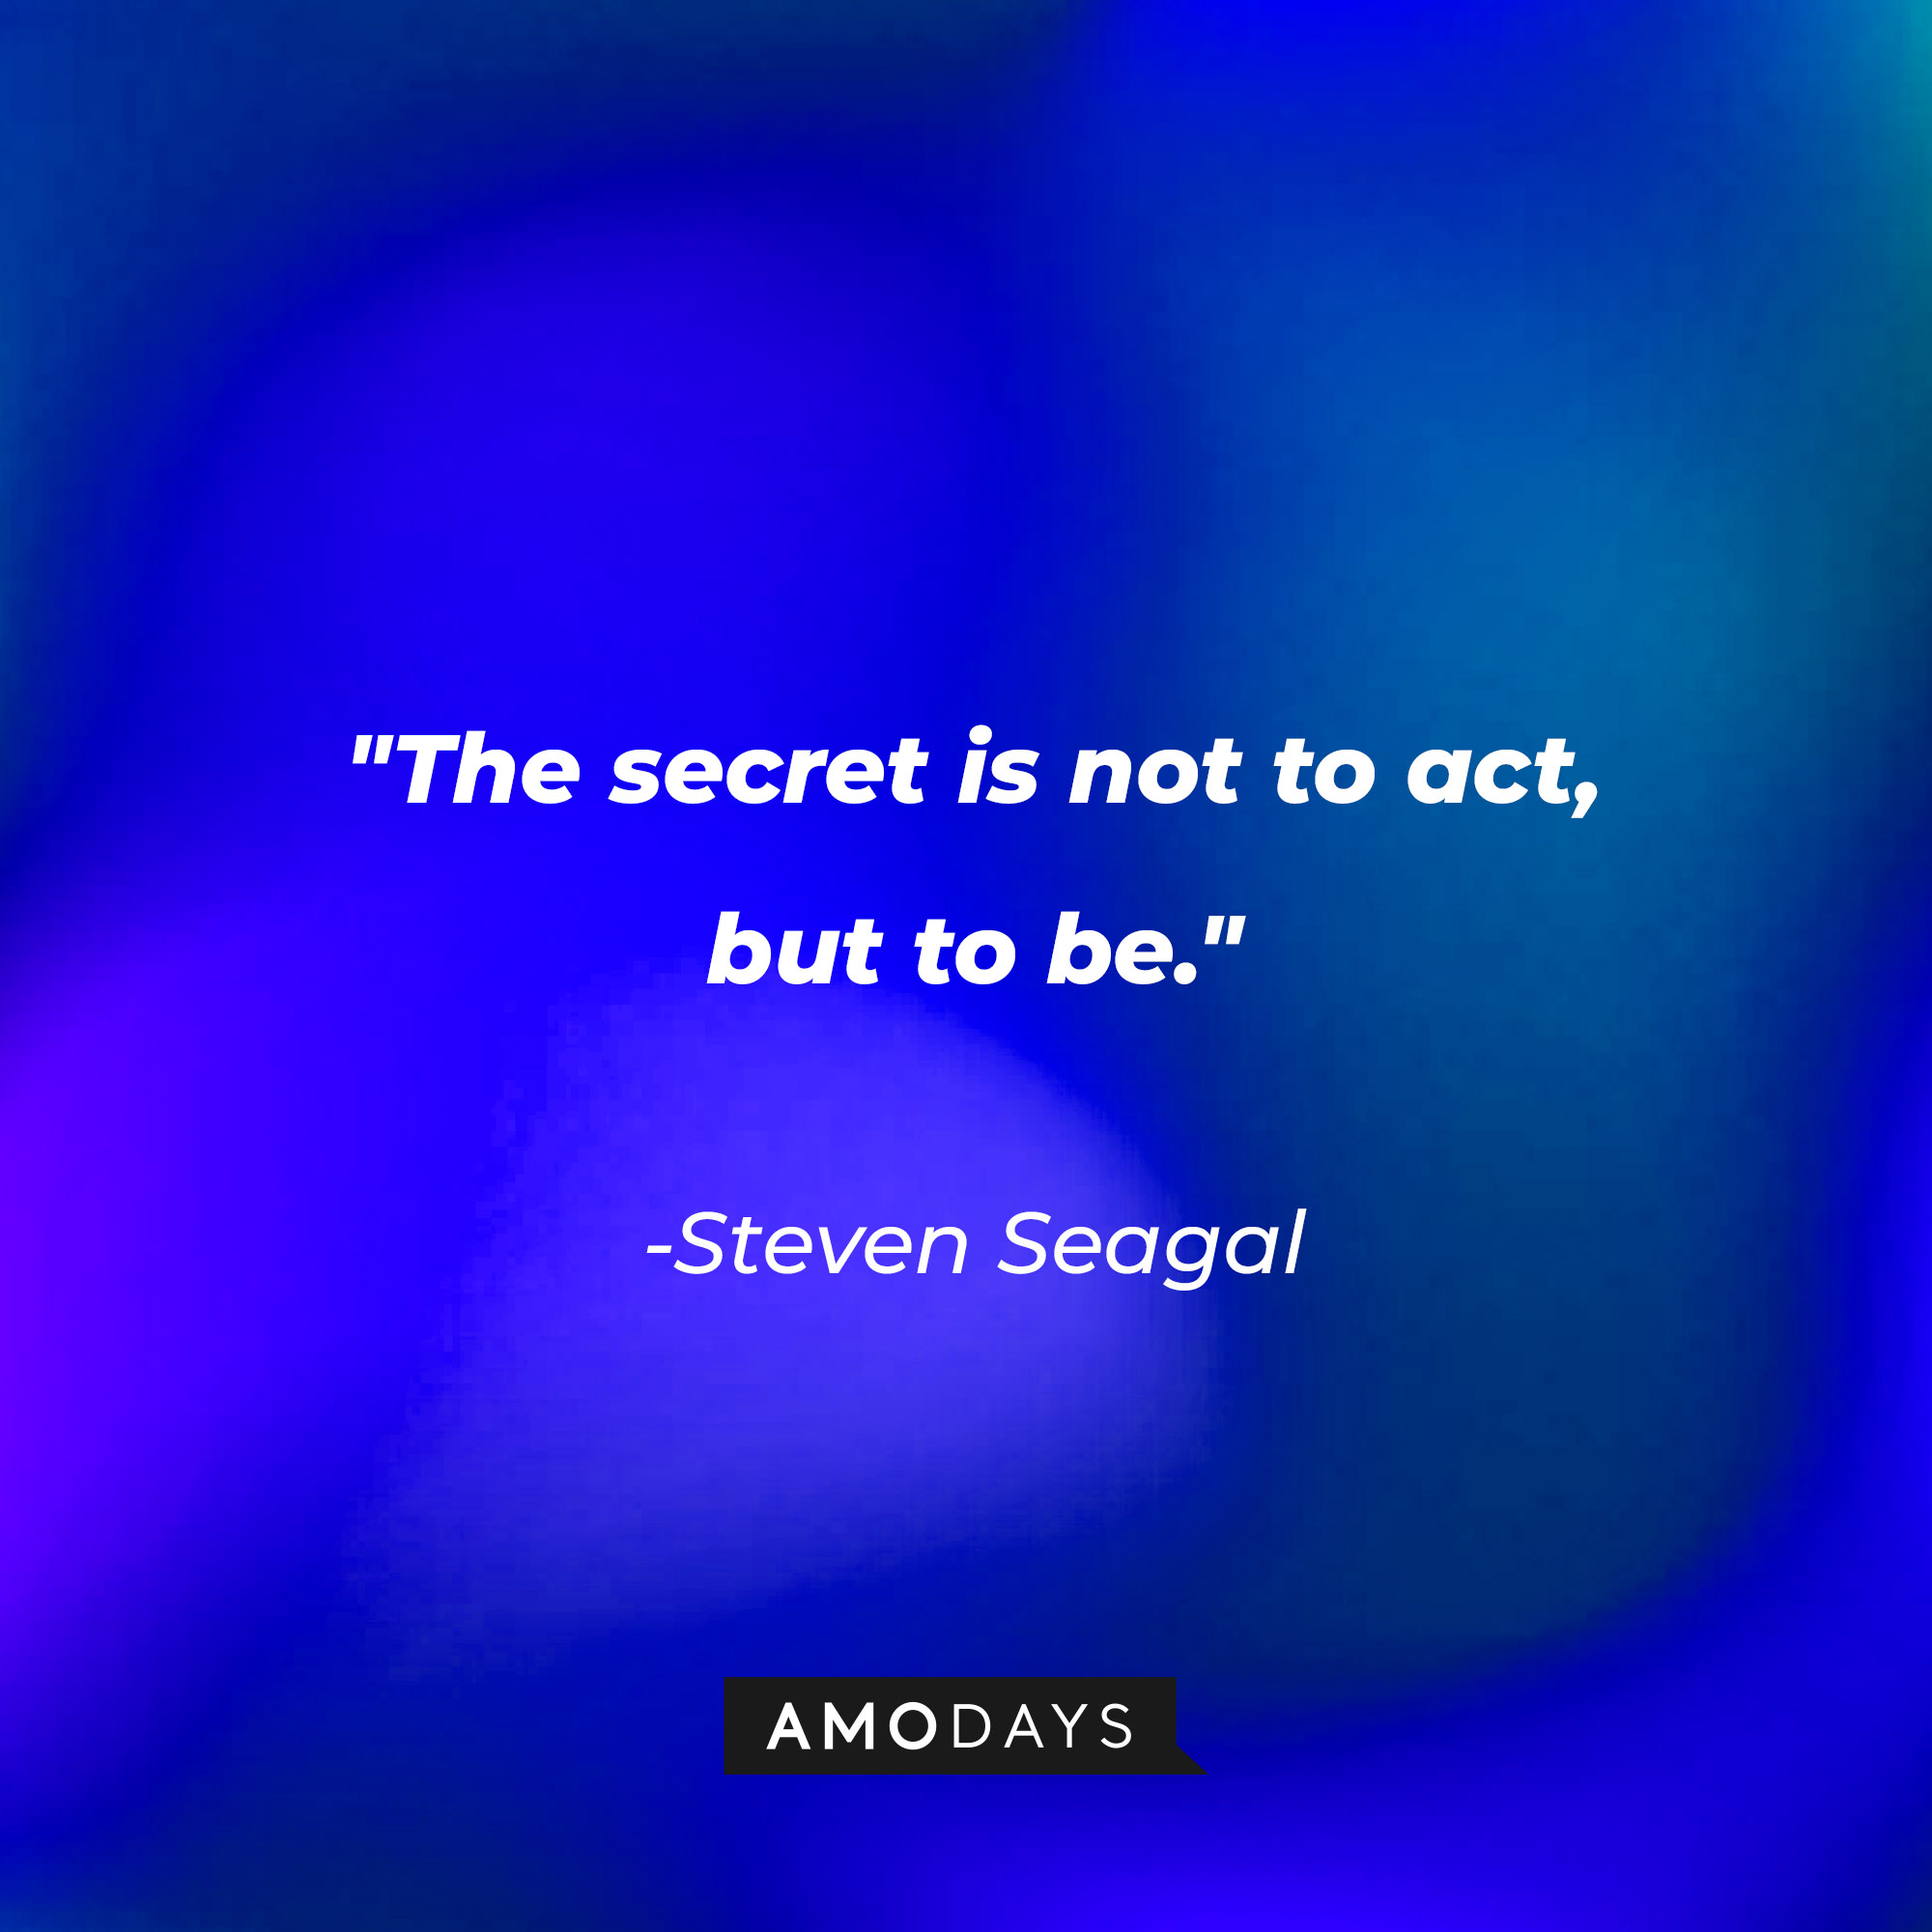 Steven Seagal’s quote: "The secret is not to act, but to be." | Image: AmoDays